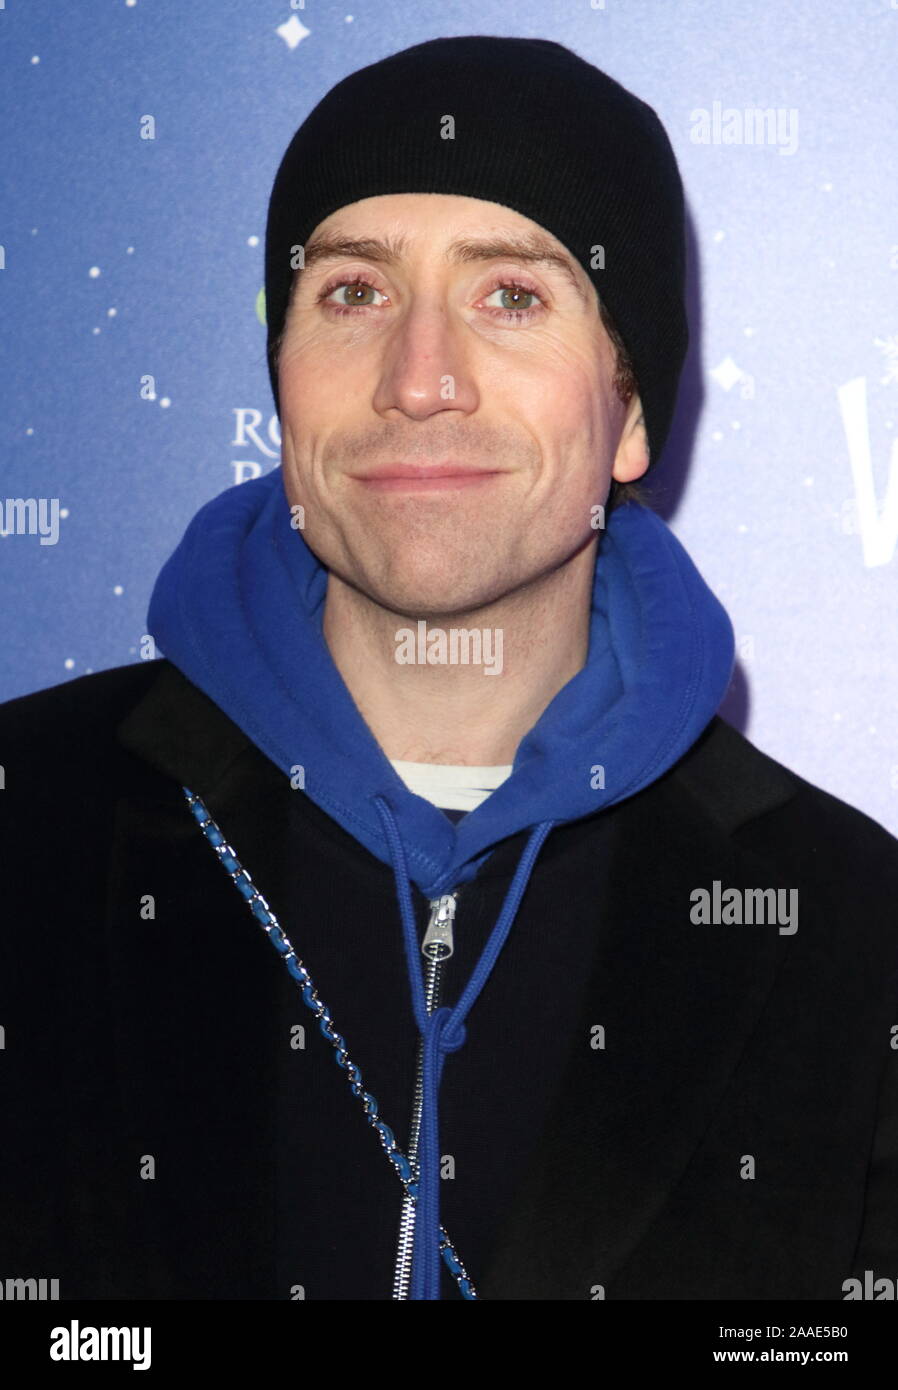 LONDON, UNITED KINGDOM - NOVEMBER 20 2019:Nick Grimshaw attends the Winter Wonderland VIP launch night at Hyde Park in London. Stock Photo